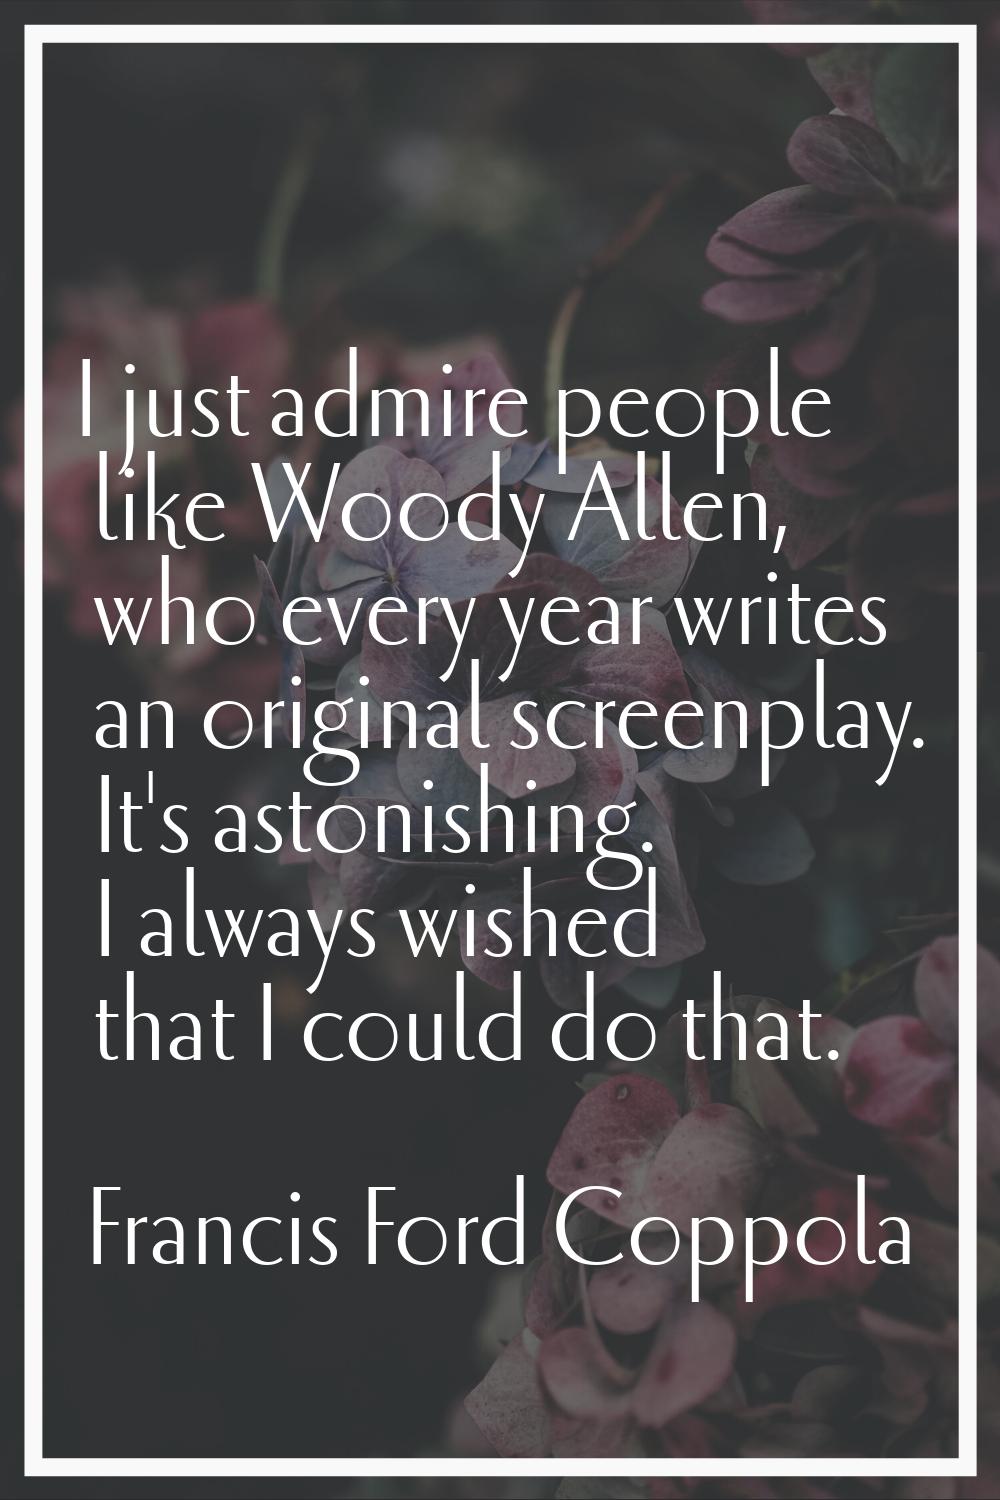 I just admire people like Woody Allen, who every year writes an original screenplay. It's astonishi